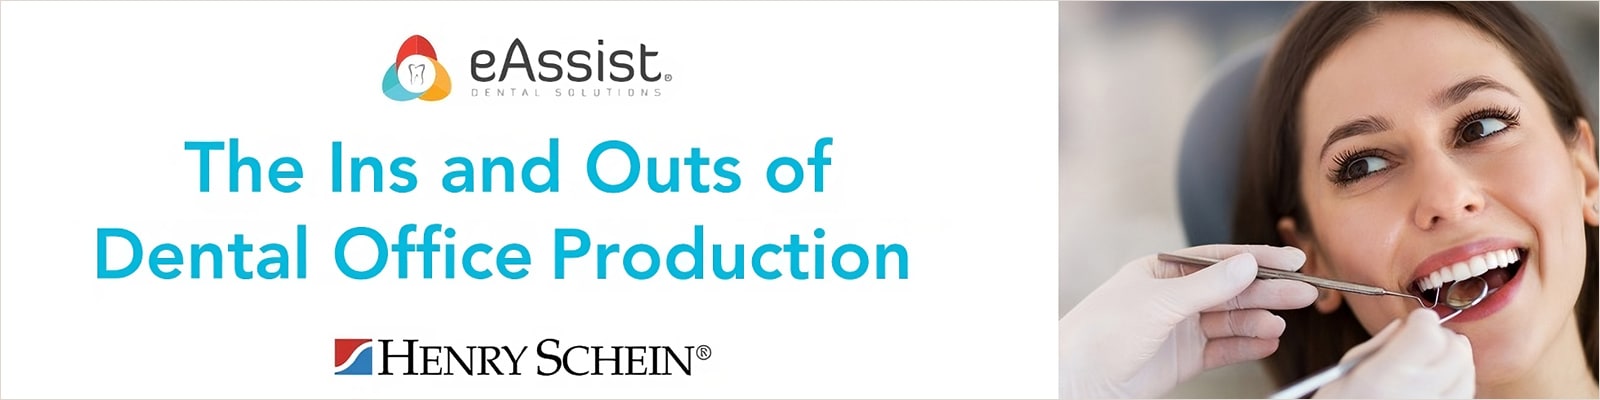 The Ins and Outs of Dental Office Production